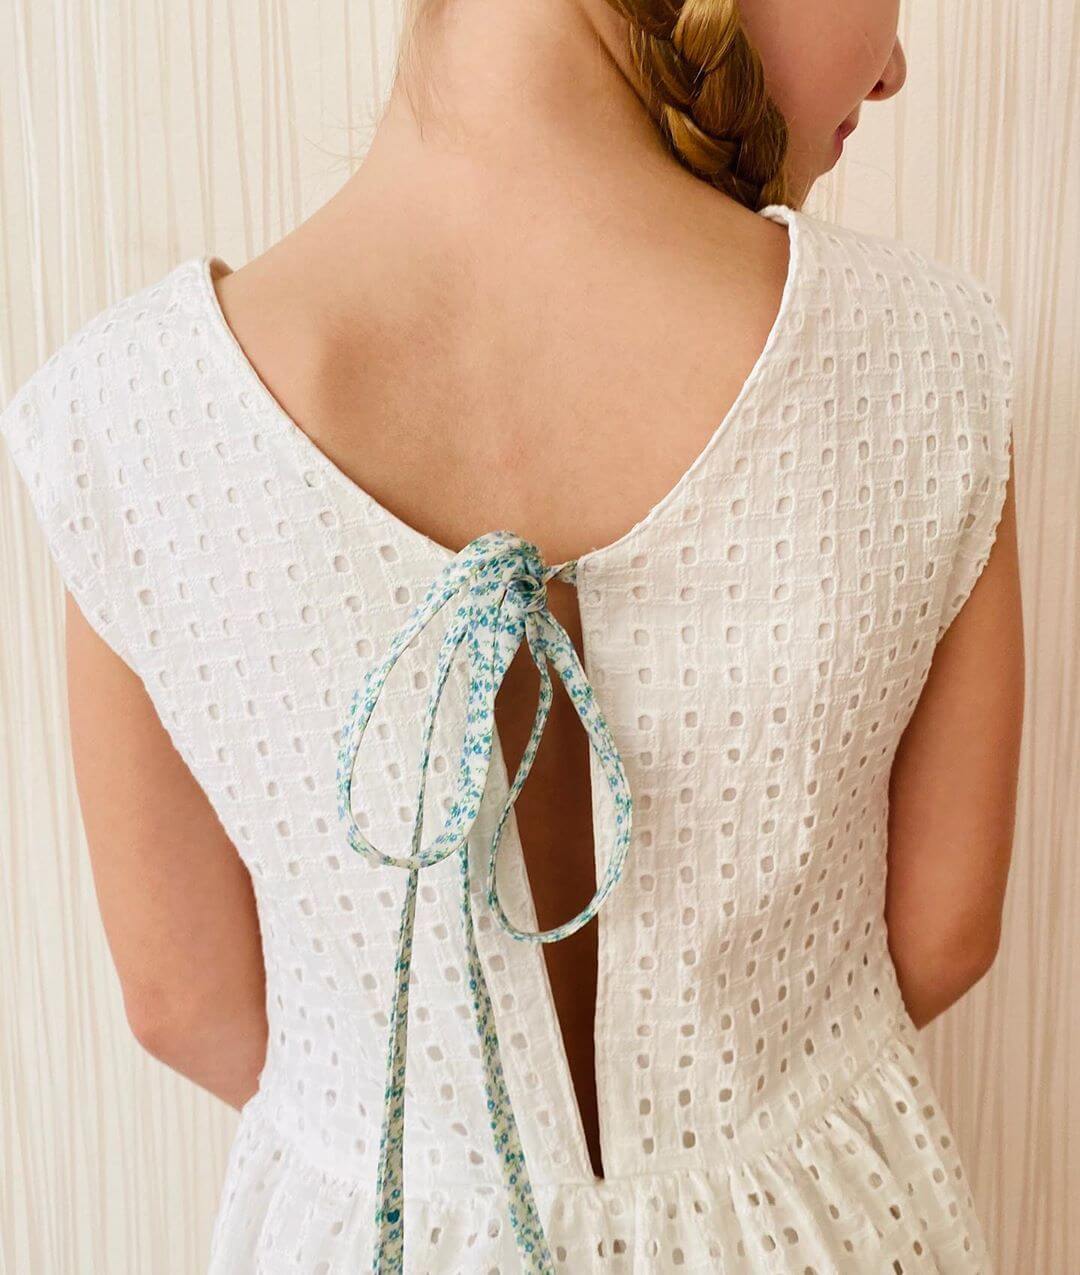 DIY Ideas To Transform Old Clothes Give New Life To The Basic Backs